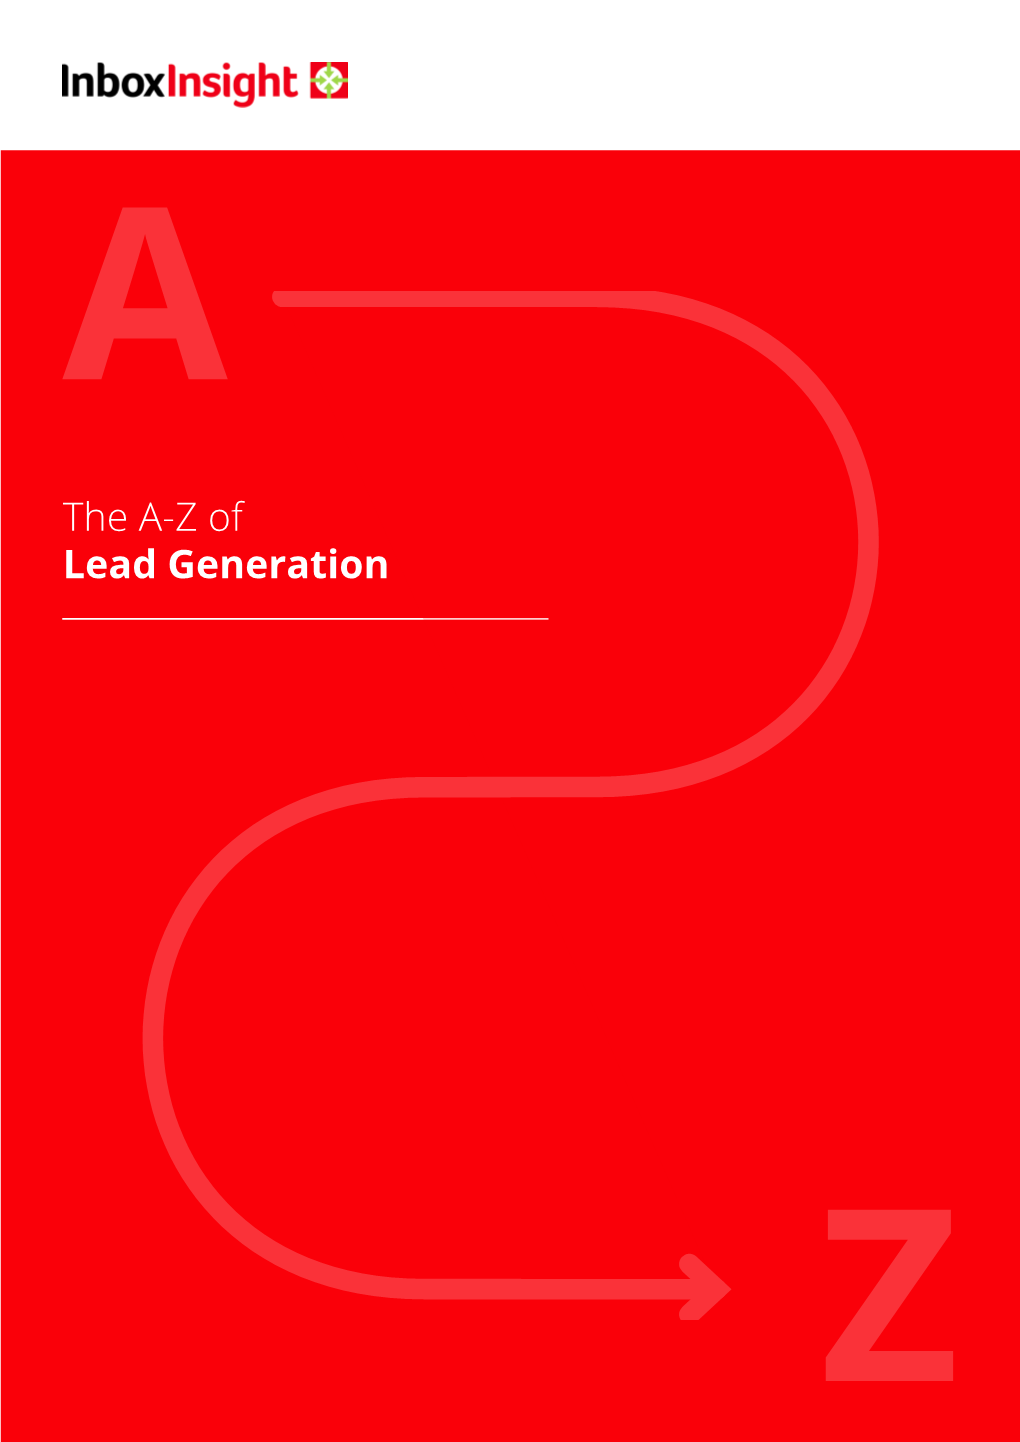 The A-Z of Lead Generation